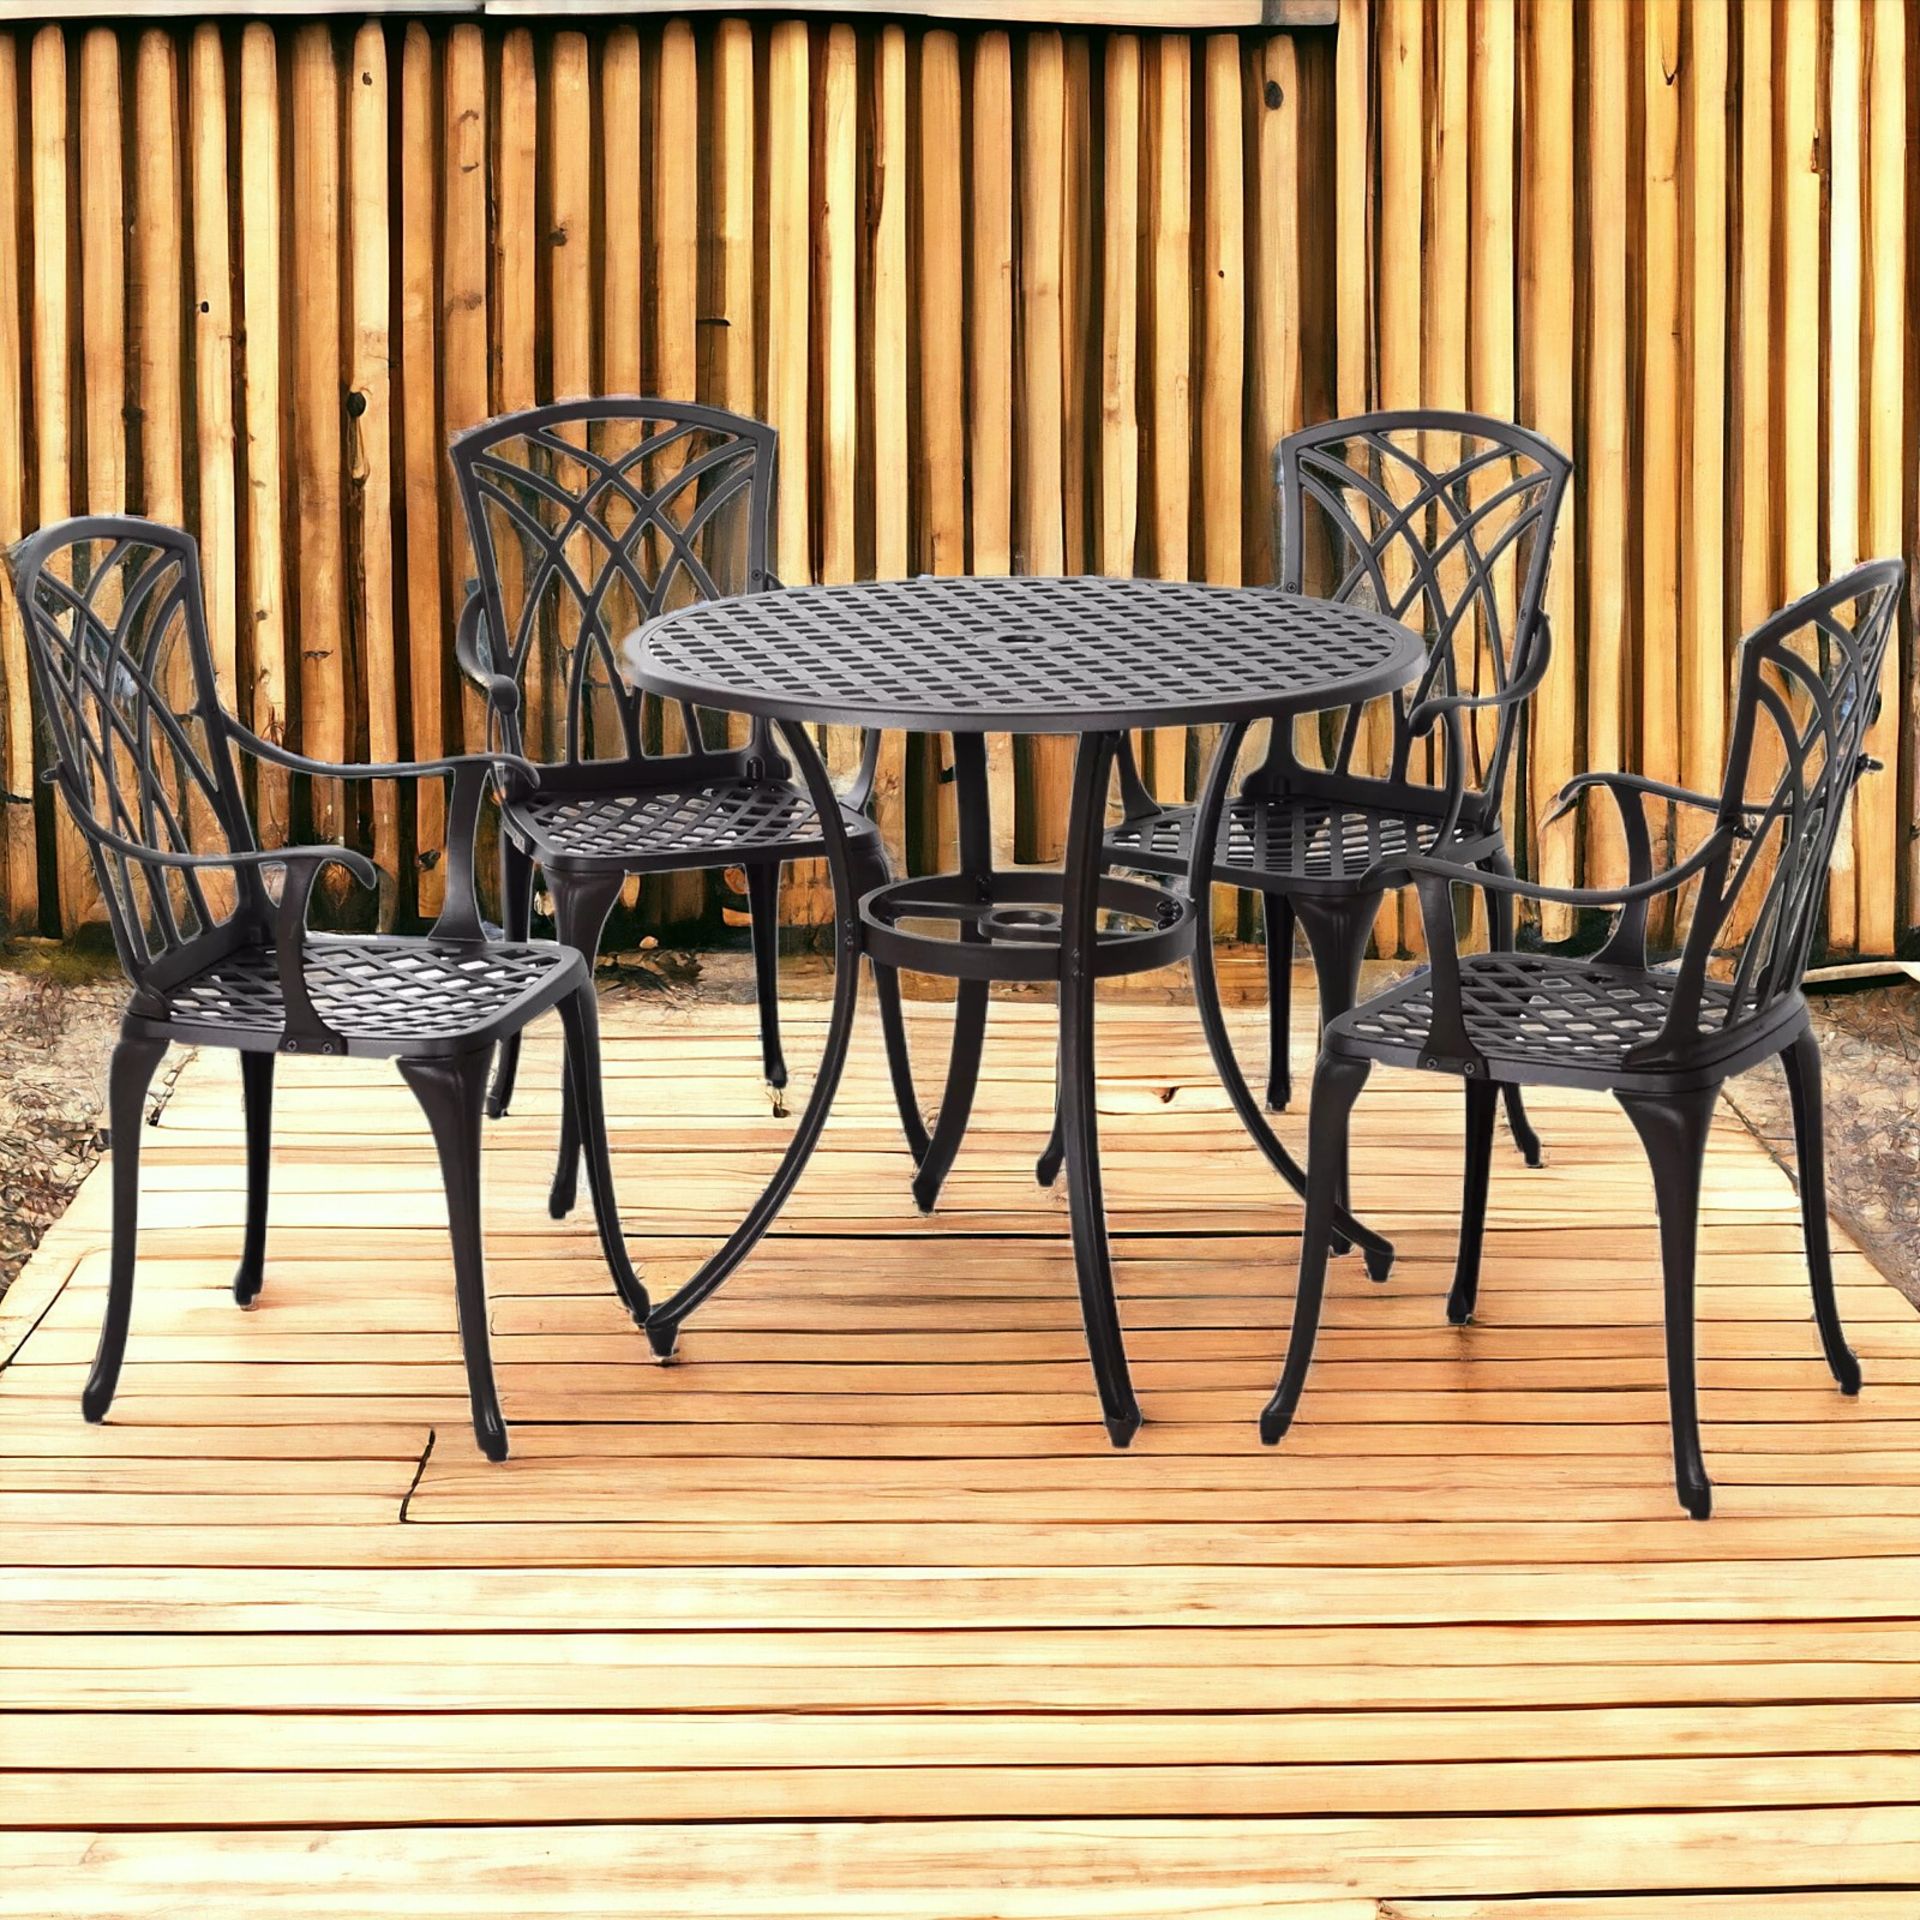 FREE DELIVERY-BRAND NEW 5 PCS COFFEE TABLE CHAIRS OUTDOOR GARDEN FURNITURE SET W/